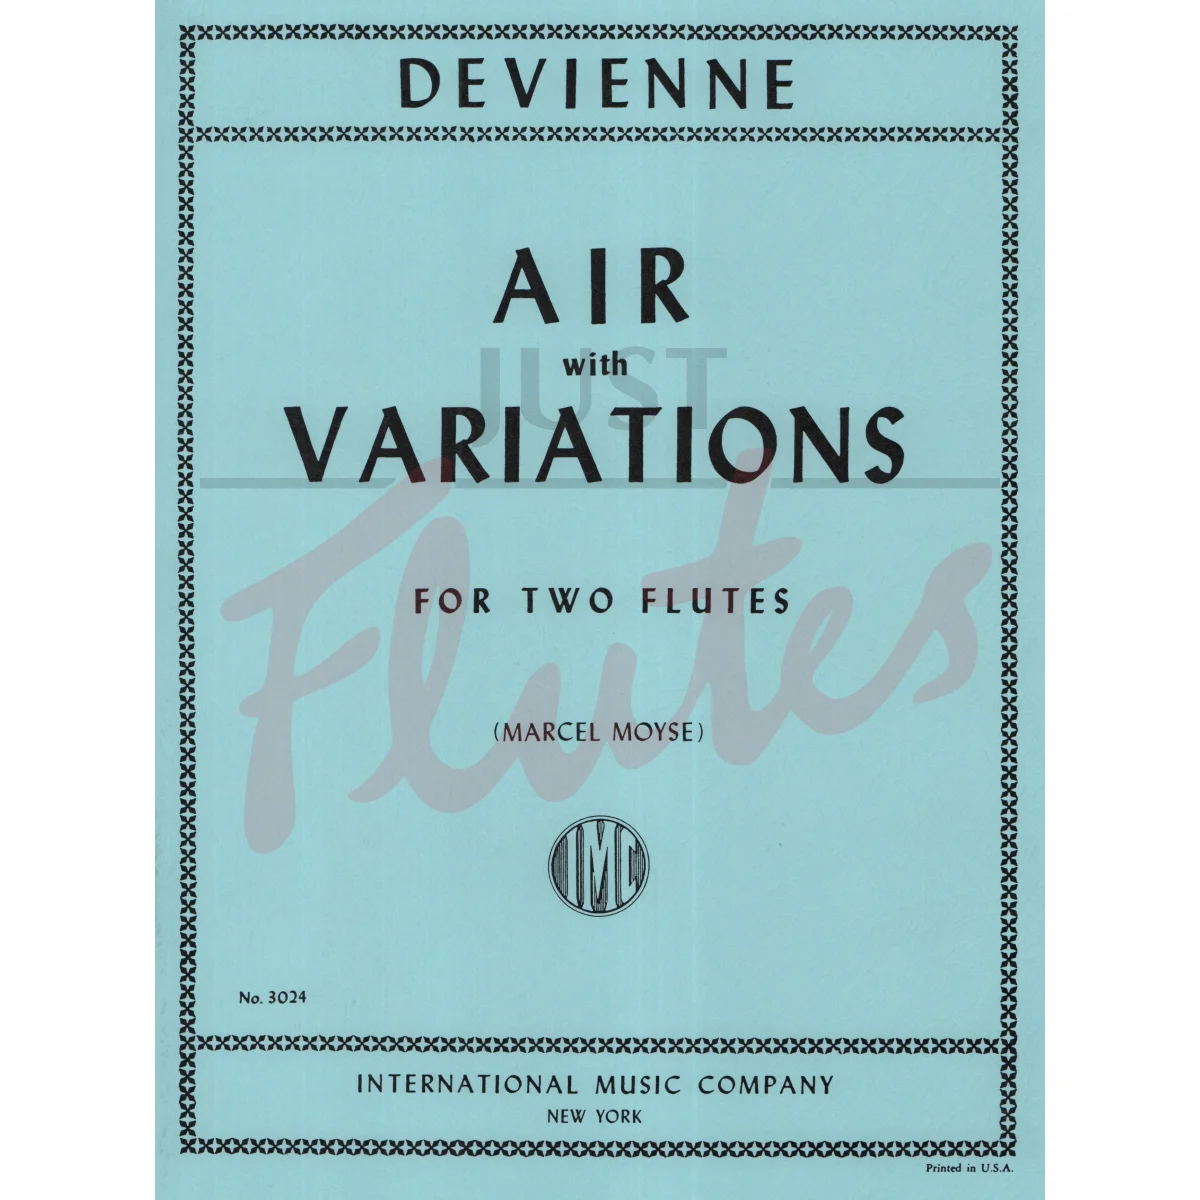 Air with Variations for Two Flutes